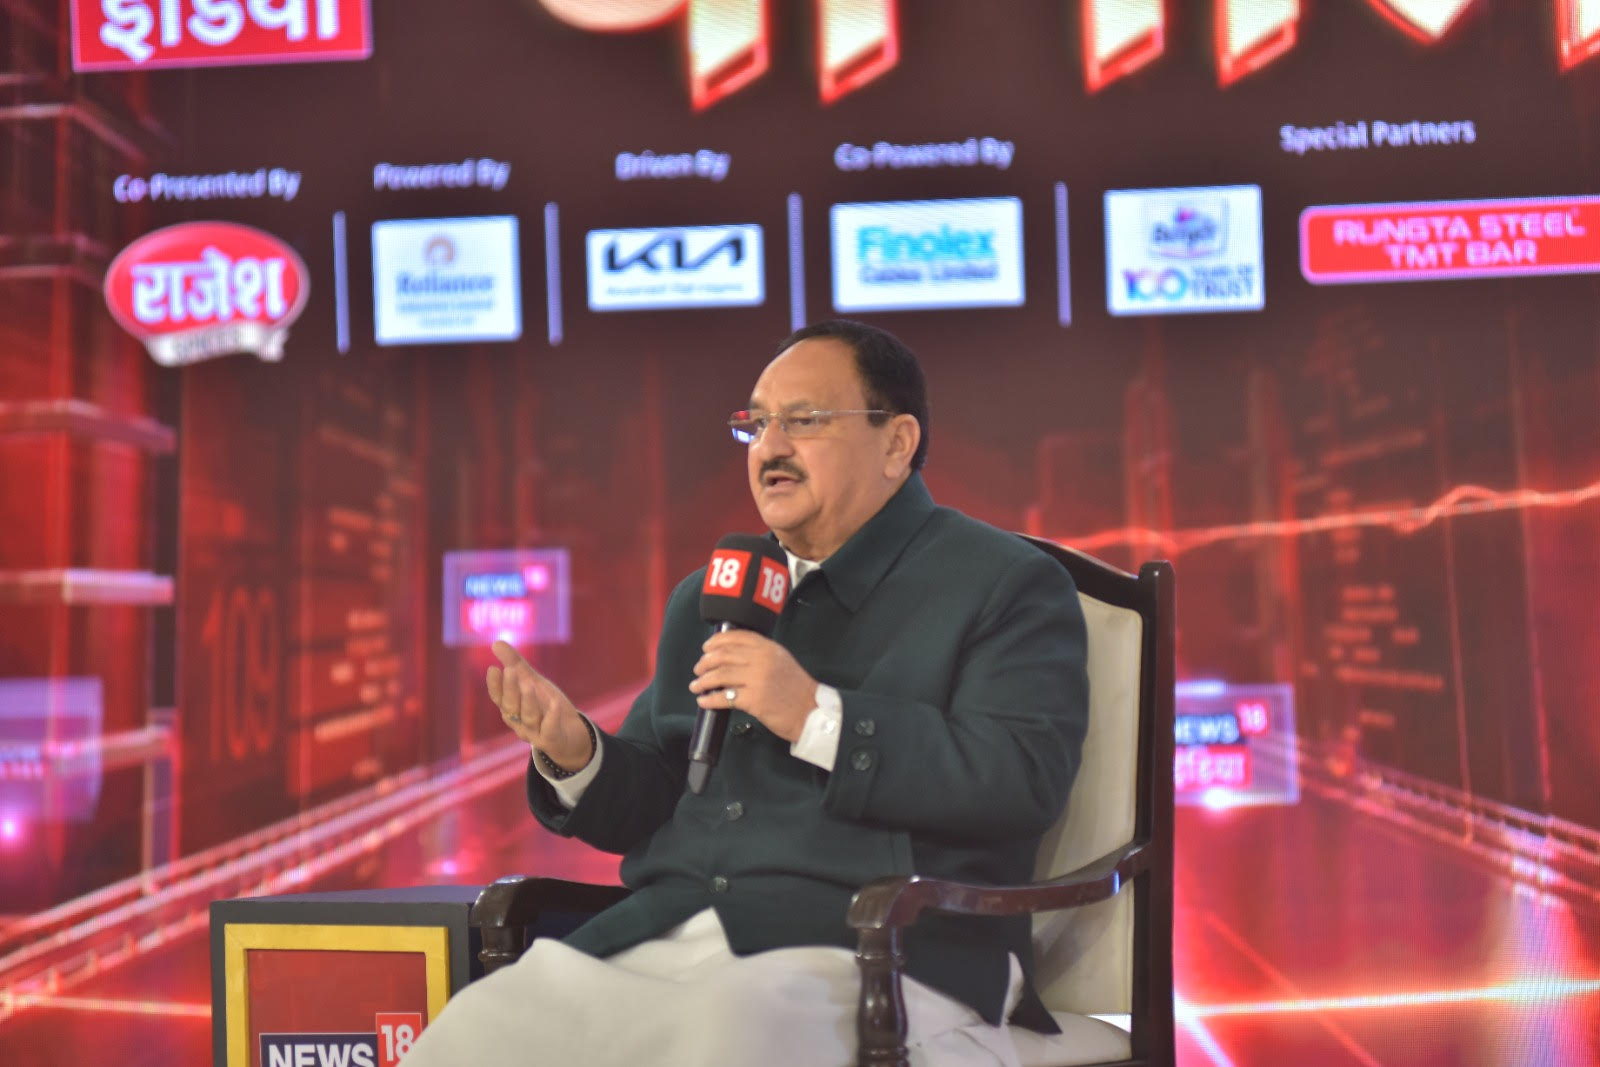 News18 India's Chaupal concludes with notable figures from Politics, Cricket, and Bollywood in attendance